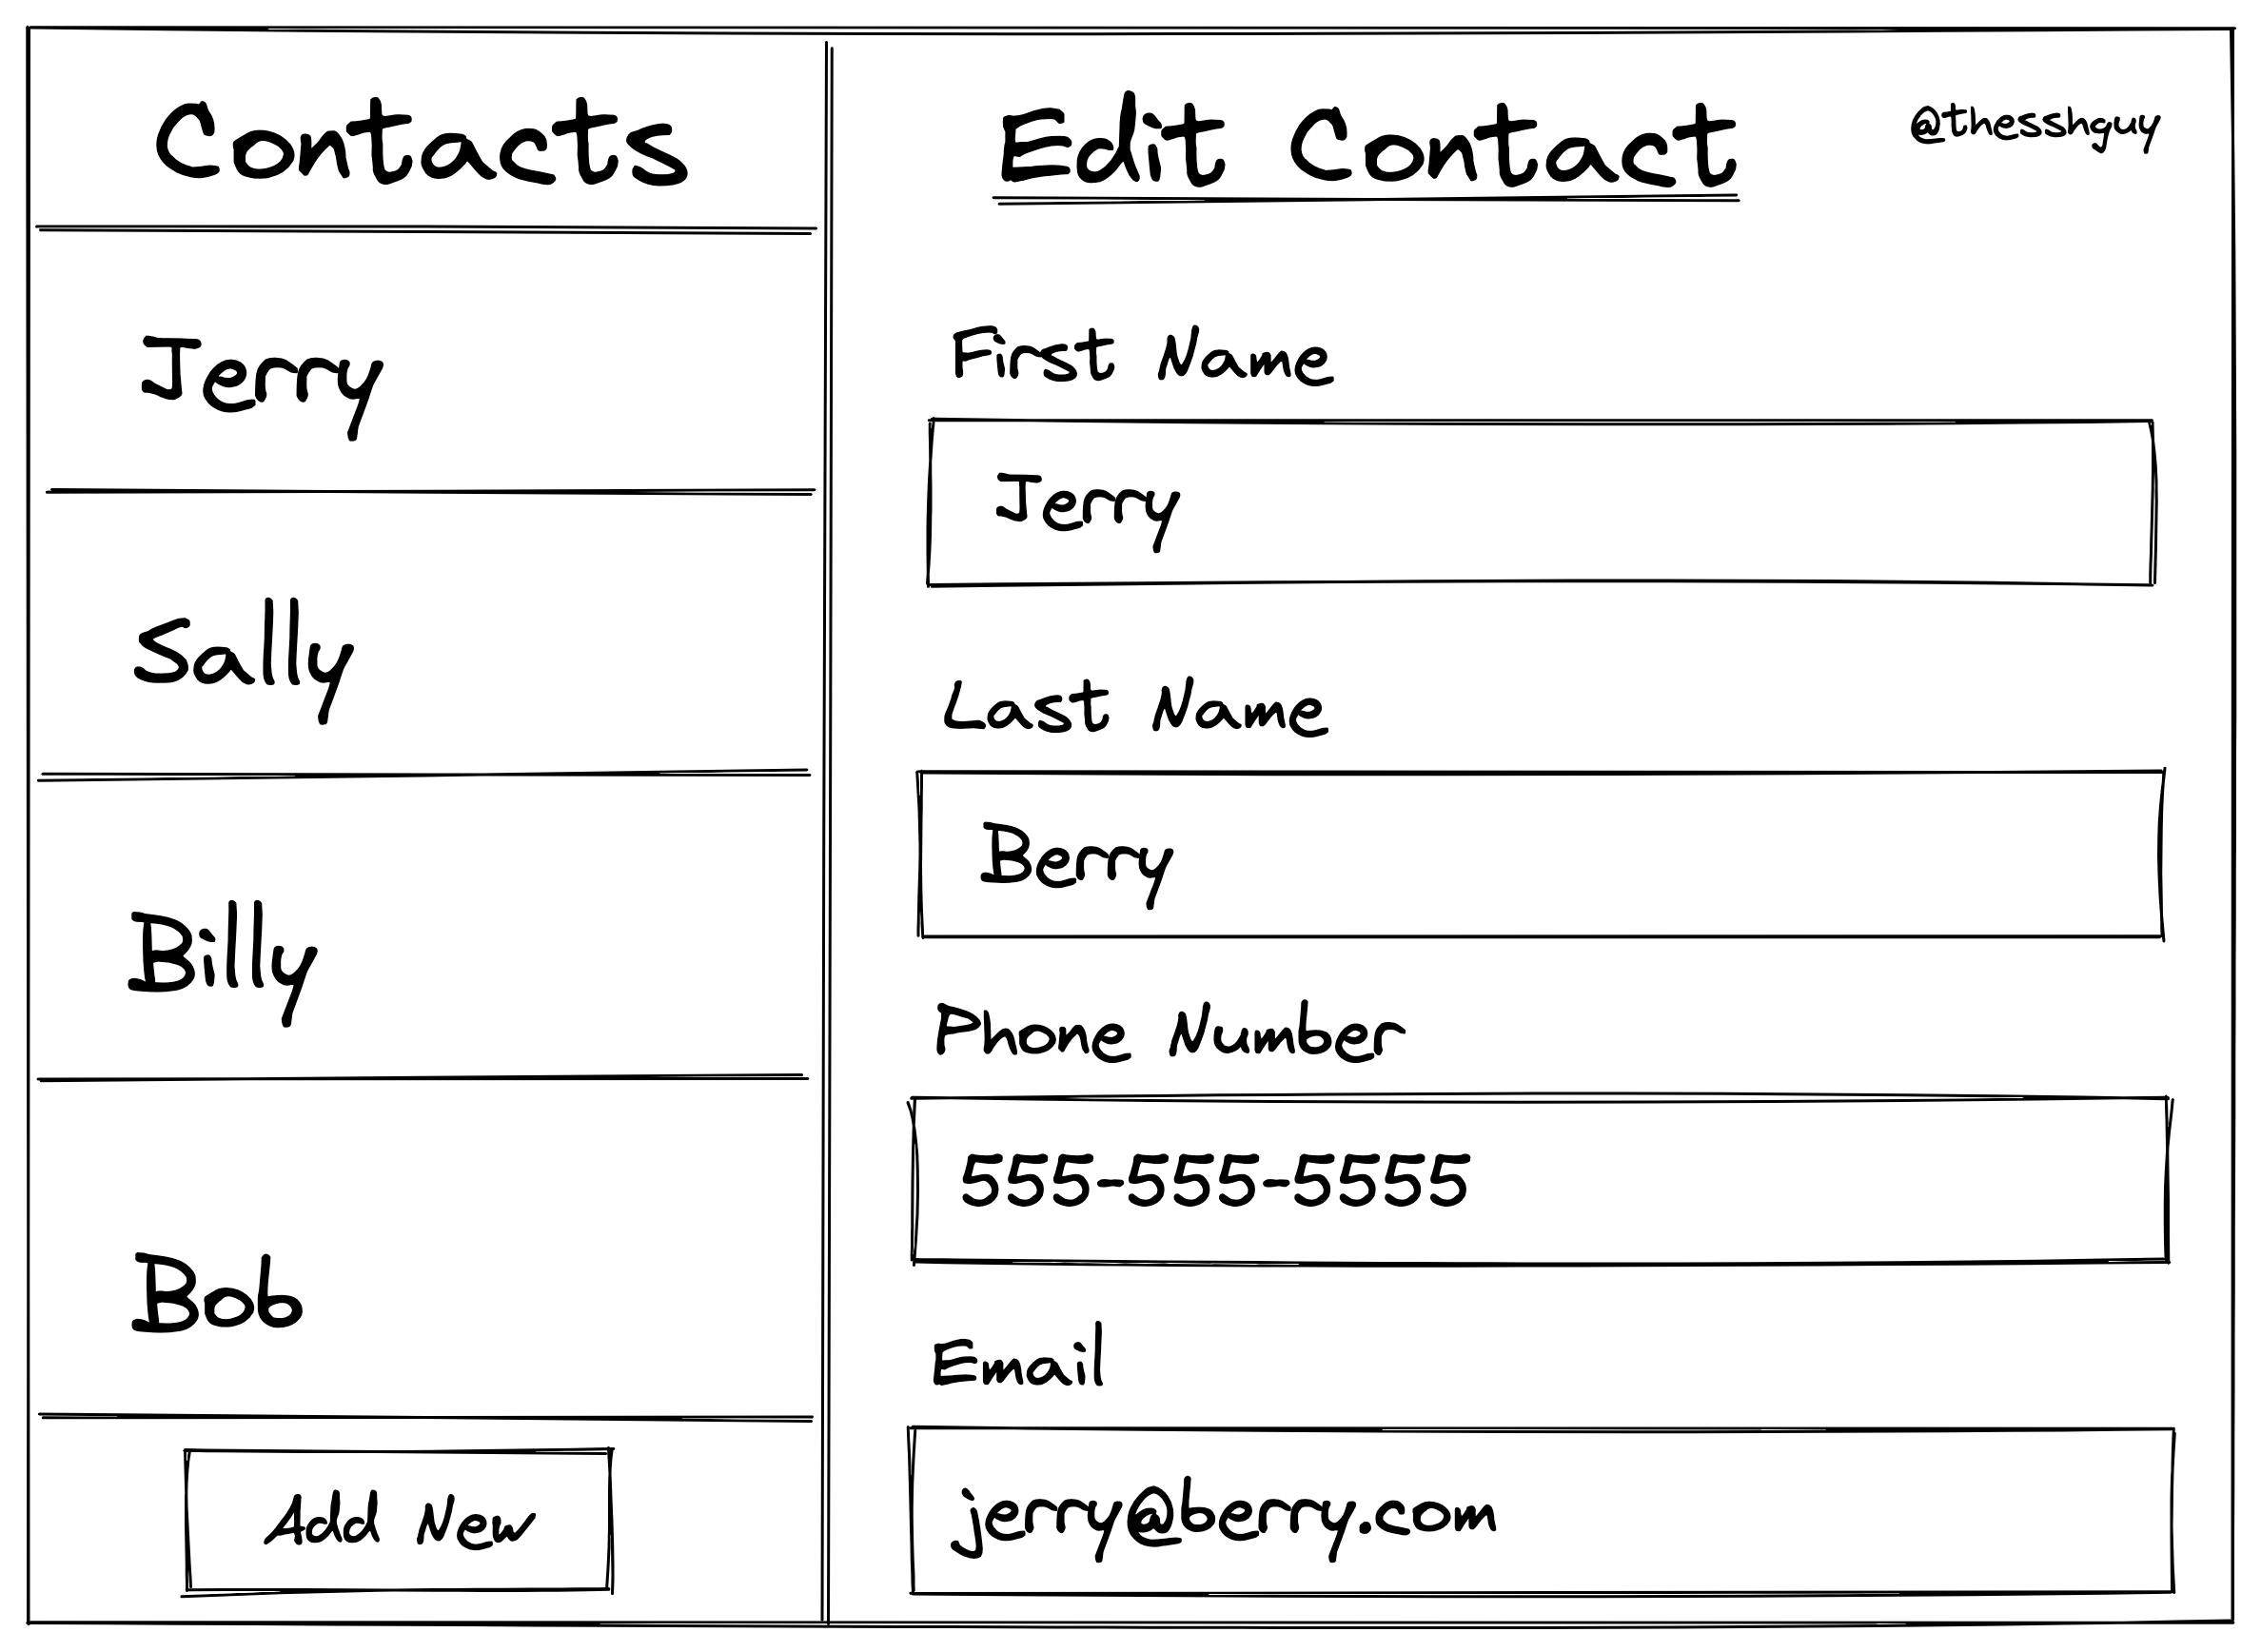 Contact List App.png